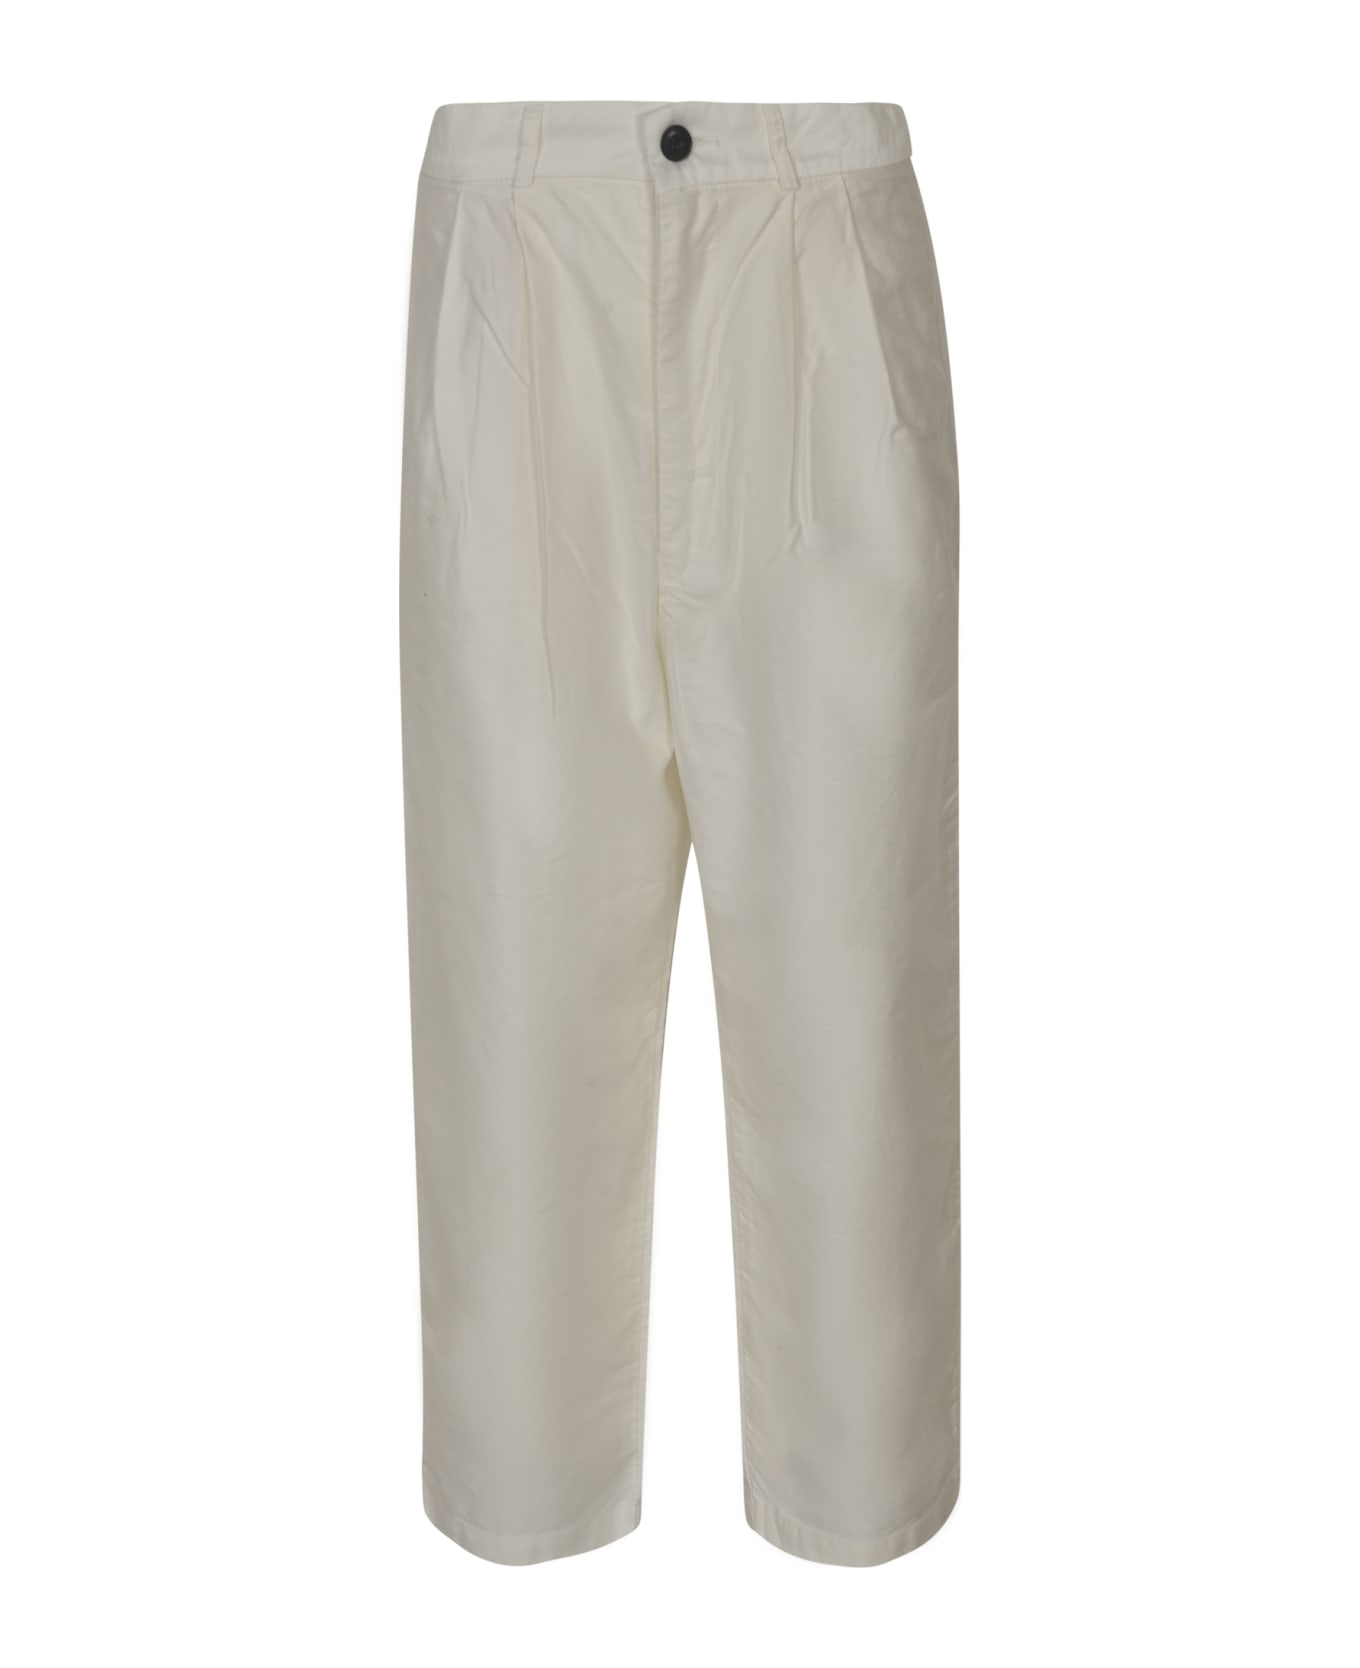 Mythinks Straight Buttoned Trousers - Ivory